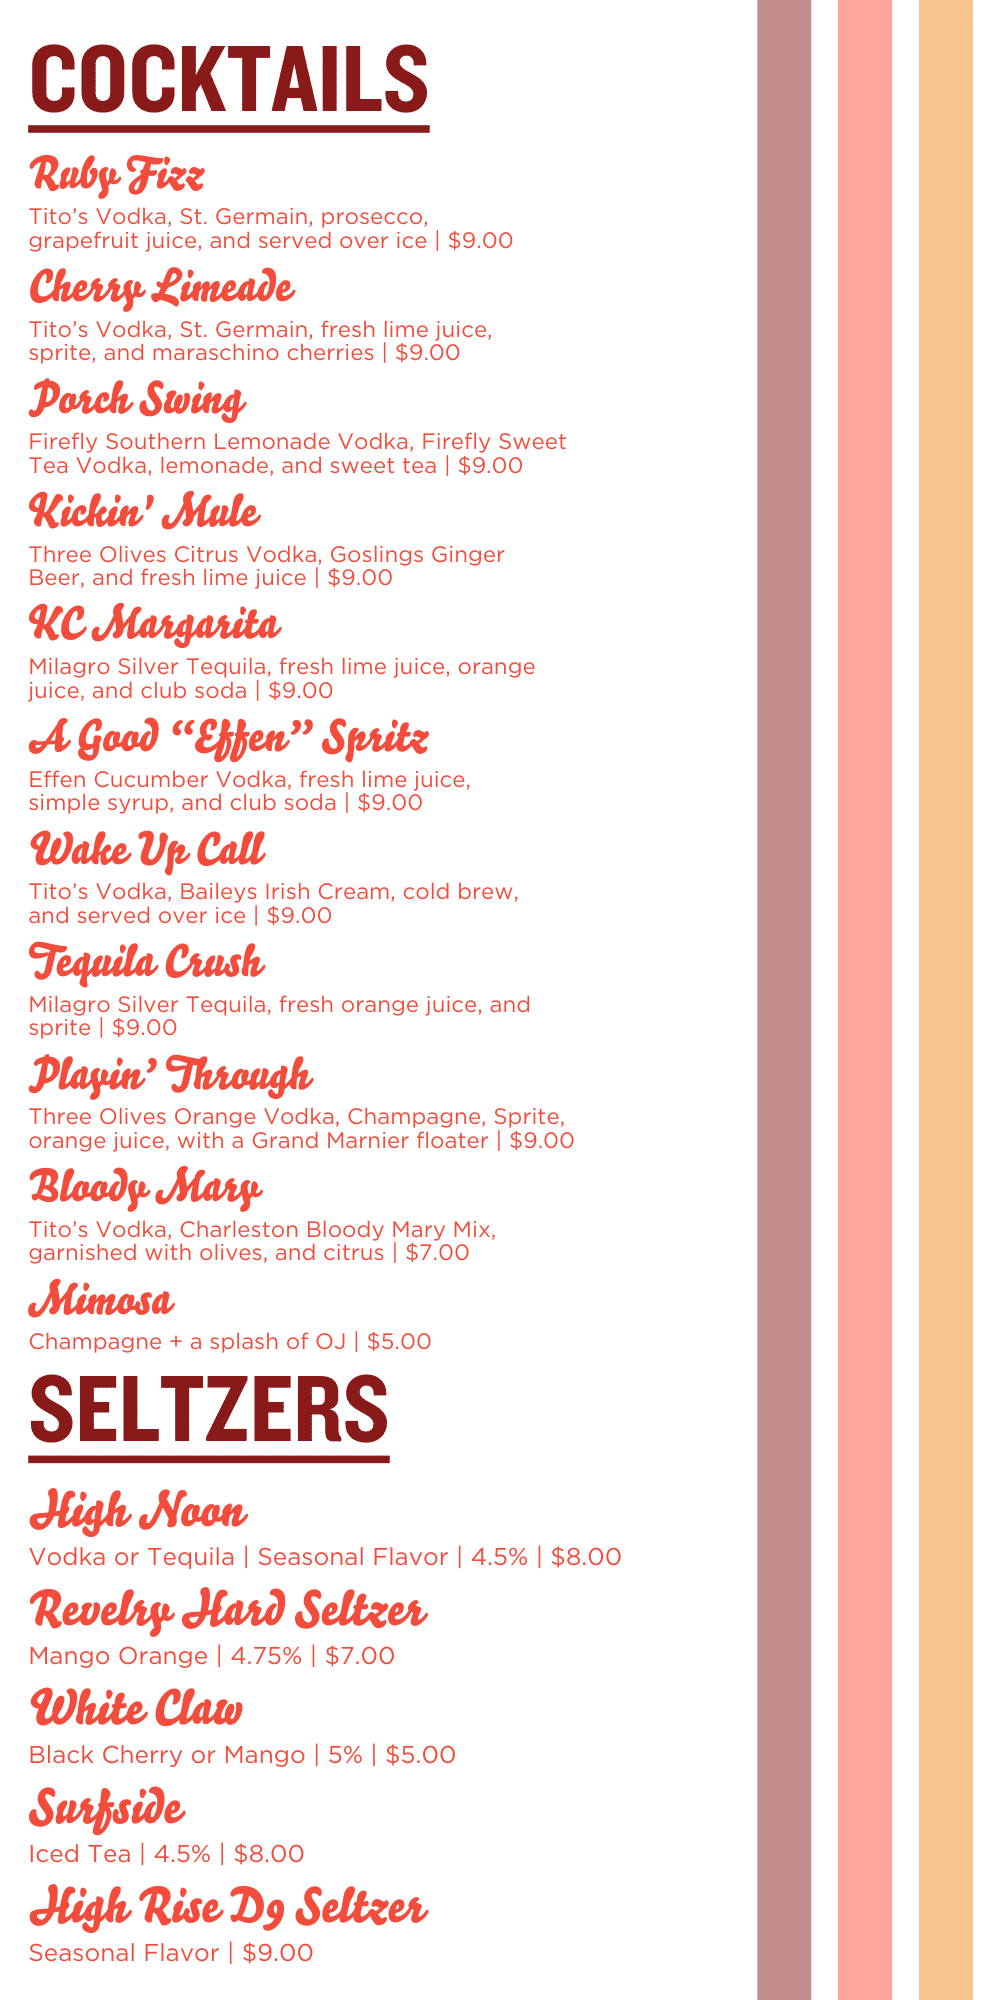 COCKTAIL-SELTZERS